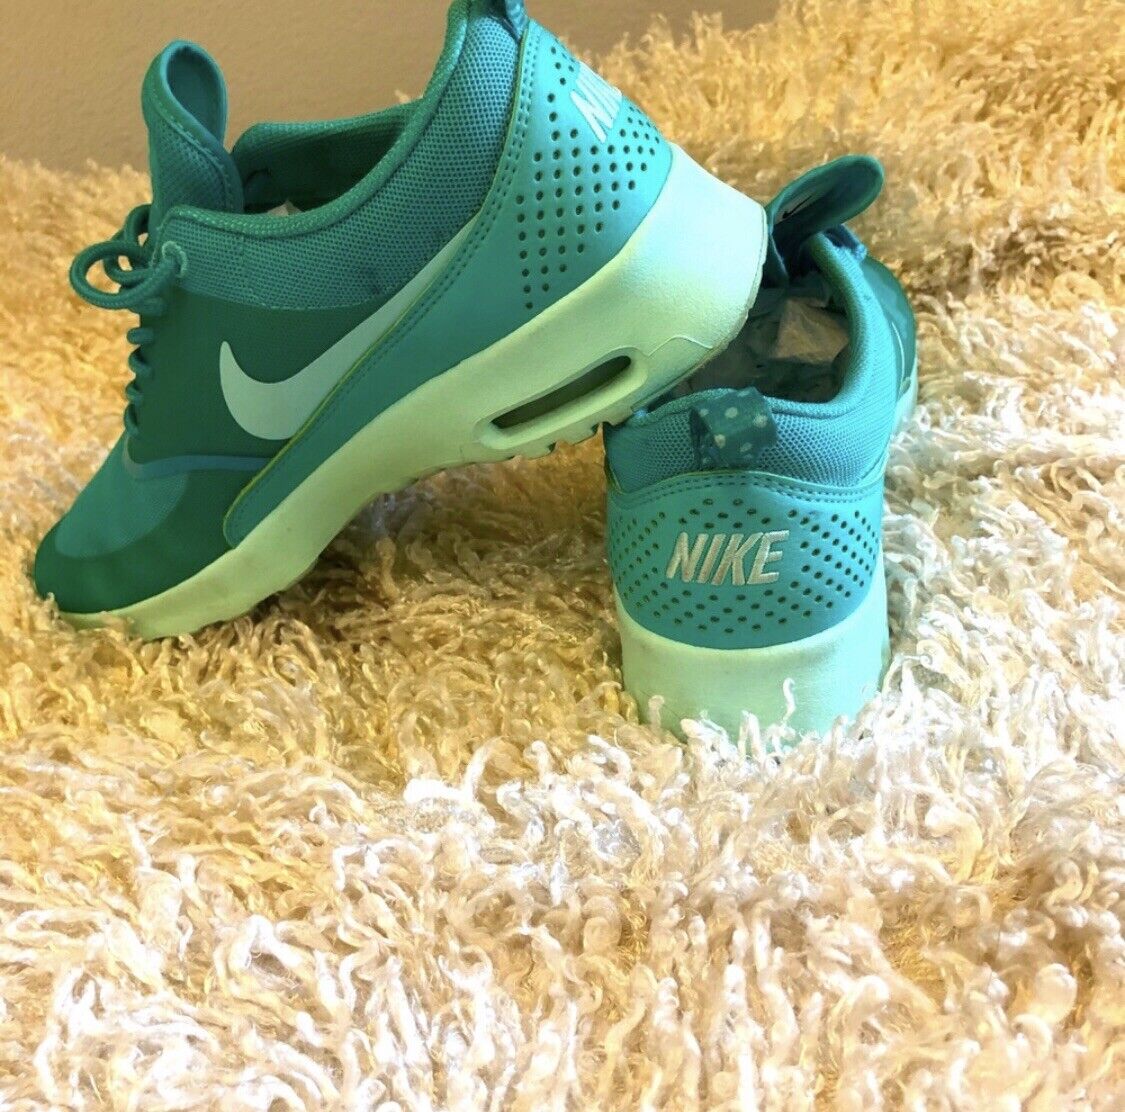 Size Air Max Thea Green - 599409-310 for sale online | eBay